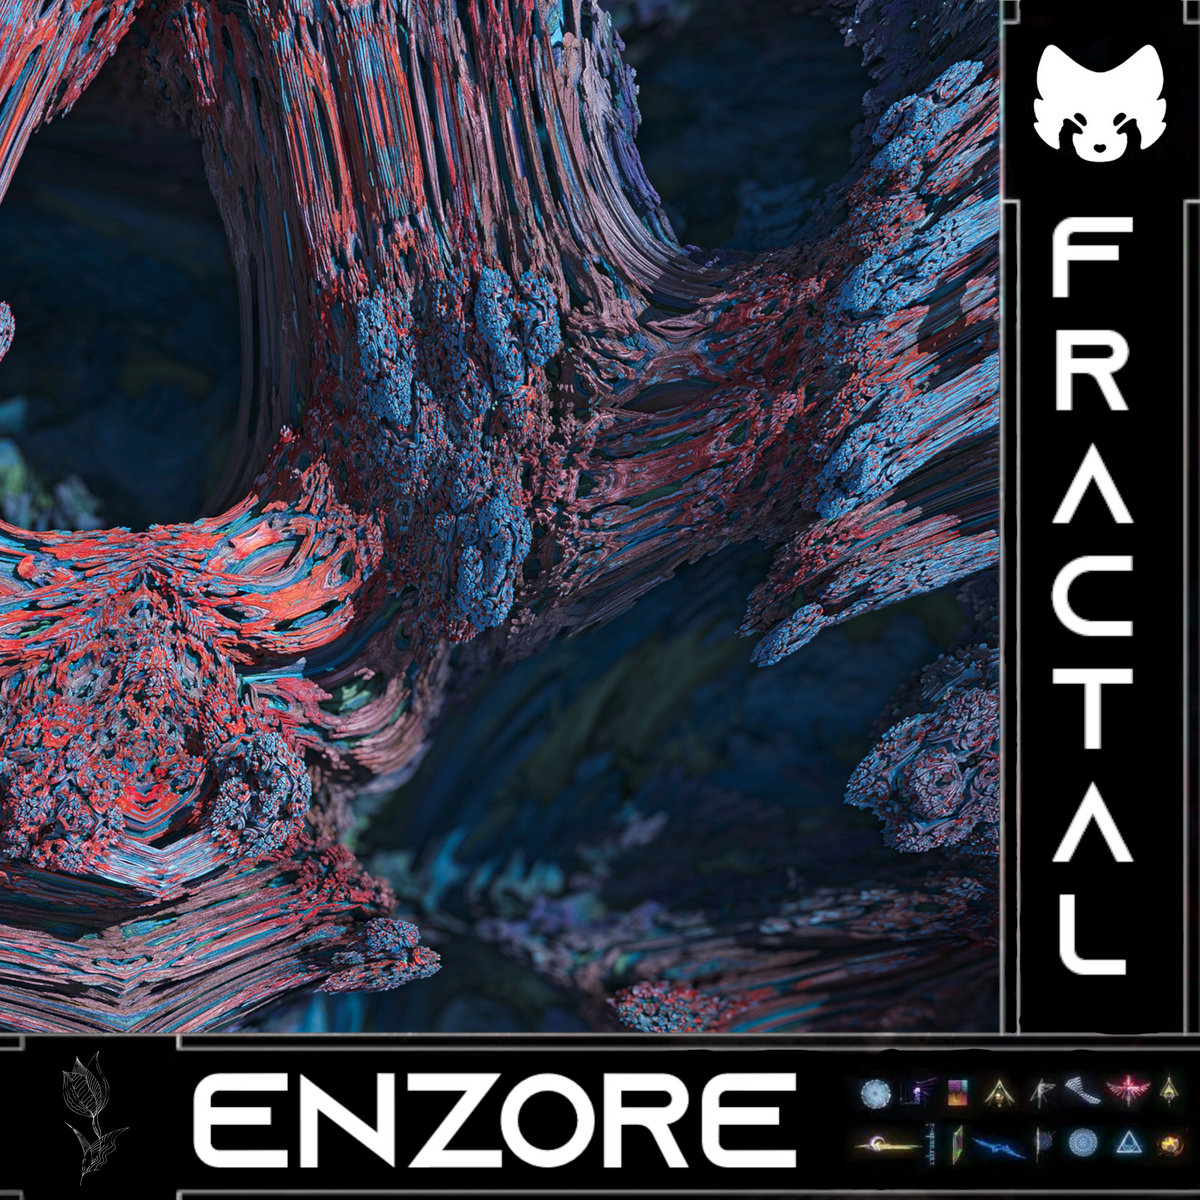 OUT NOW!

Fractal EP by Enzore (@Enzoremusic)

An incredible mixture of atmospheric, ambient textures with groovy future garage beats.

Listen/download now on LMNL Records (link in comments).

#futuregarage #garagemusic #ambient